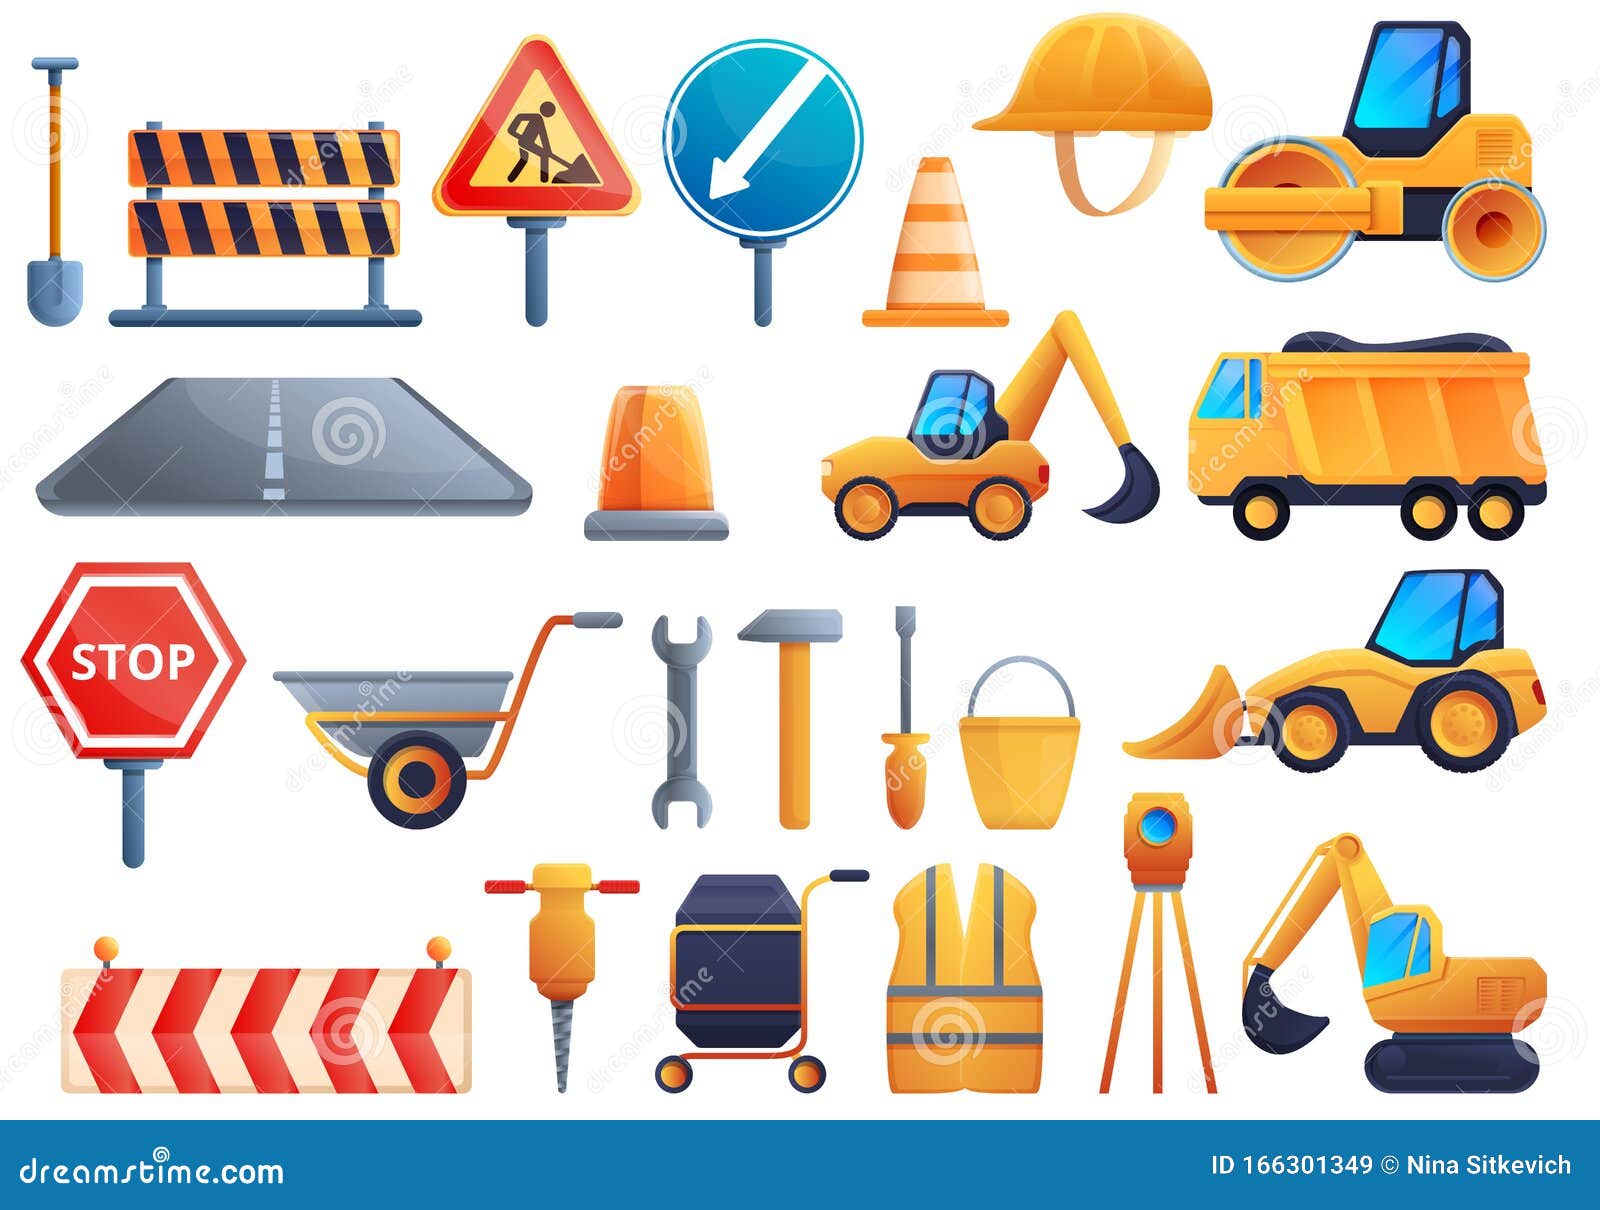 Road Repair Icons Set, Cartoon Style Stock Vector - Illustration of ...